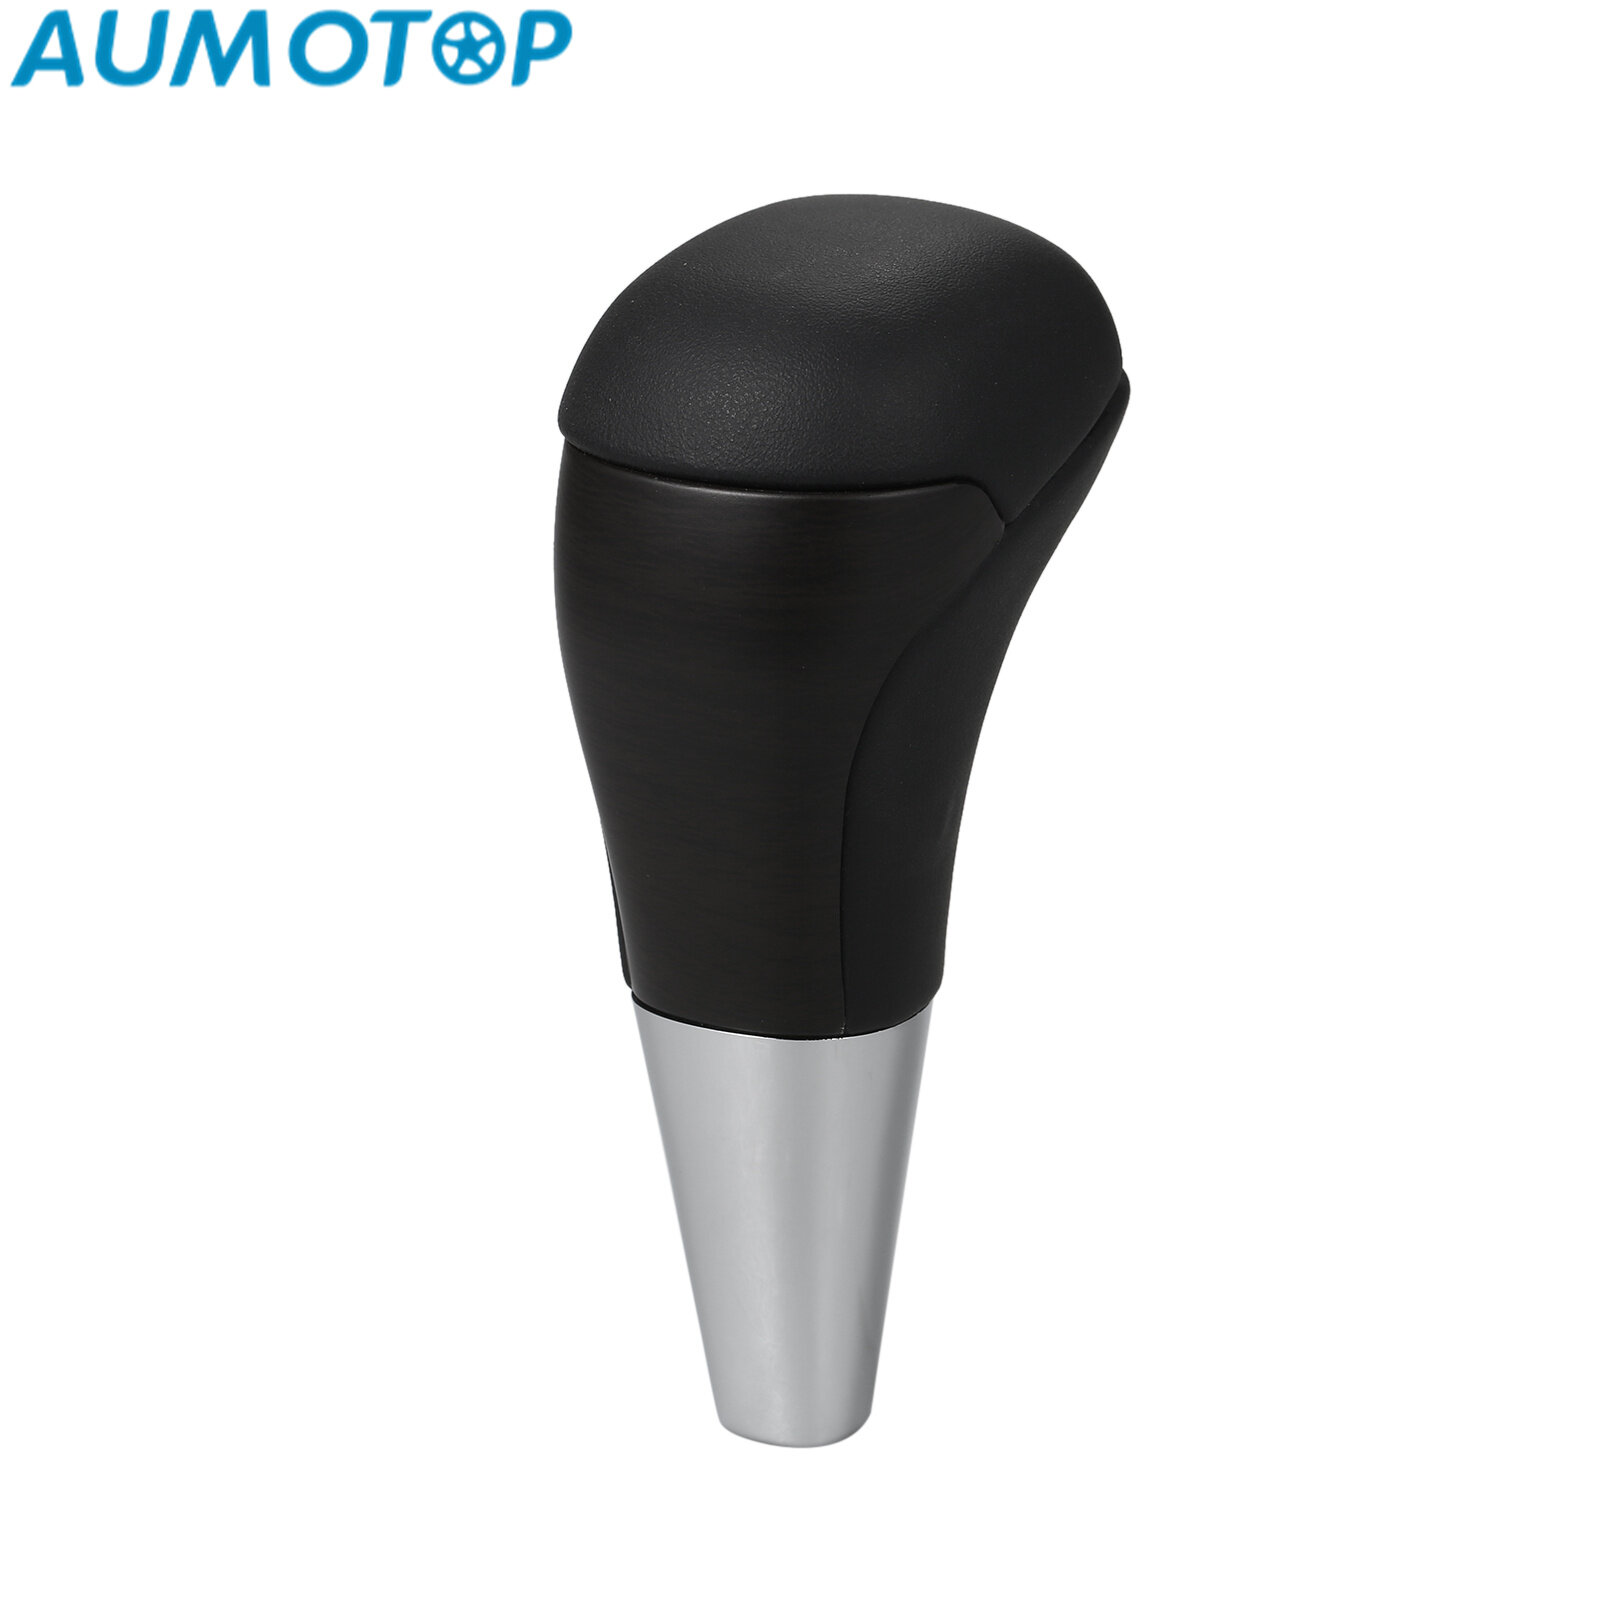 Gear Shift Knob Black Wood Grain Replacement for Toyota Camry RAV4 Land